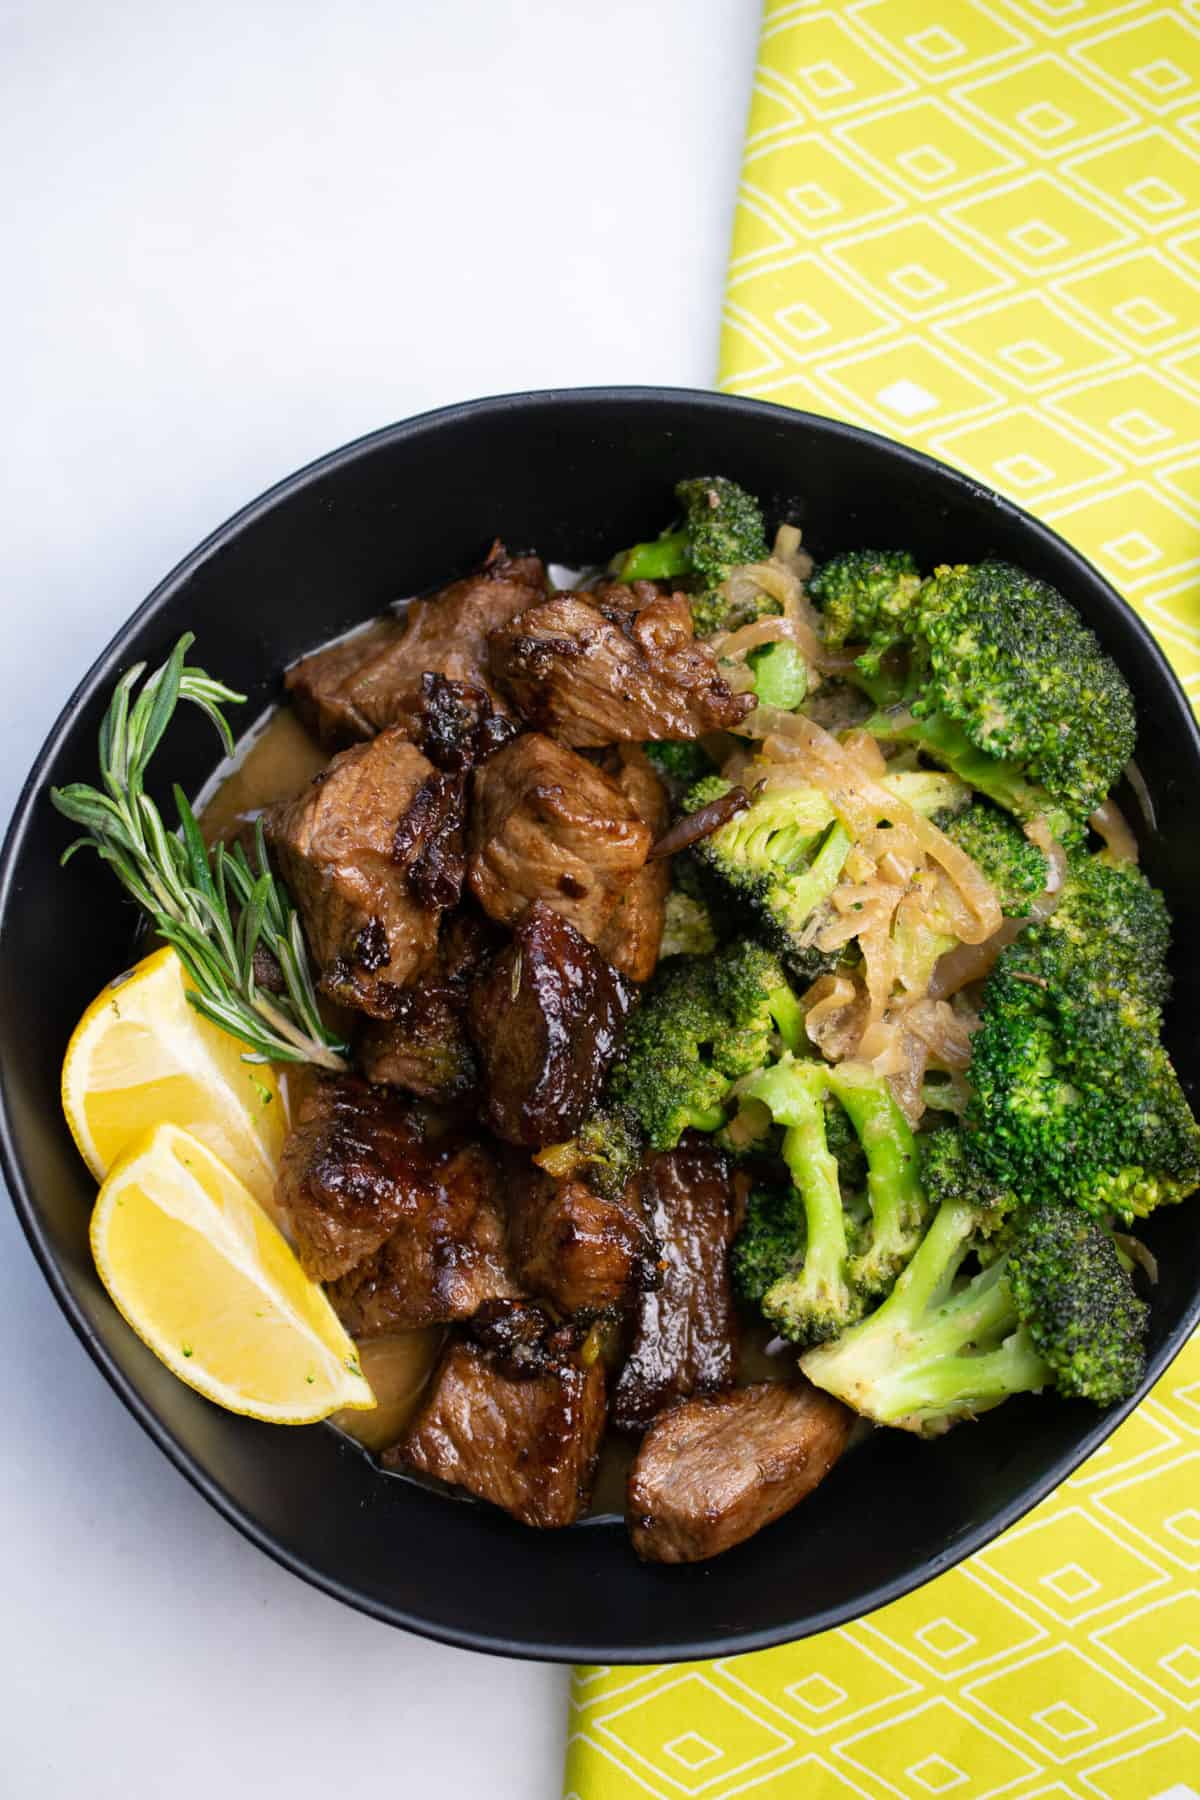 lemon herb beef and broccoli served in  a black bowl garnished with rosemary sprig and two lemon wedges.